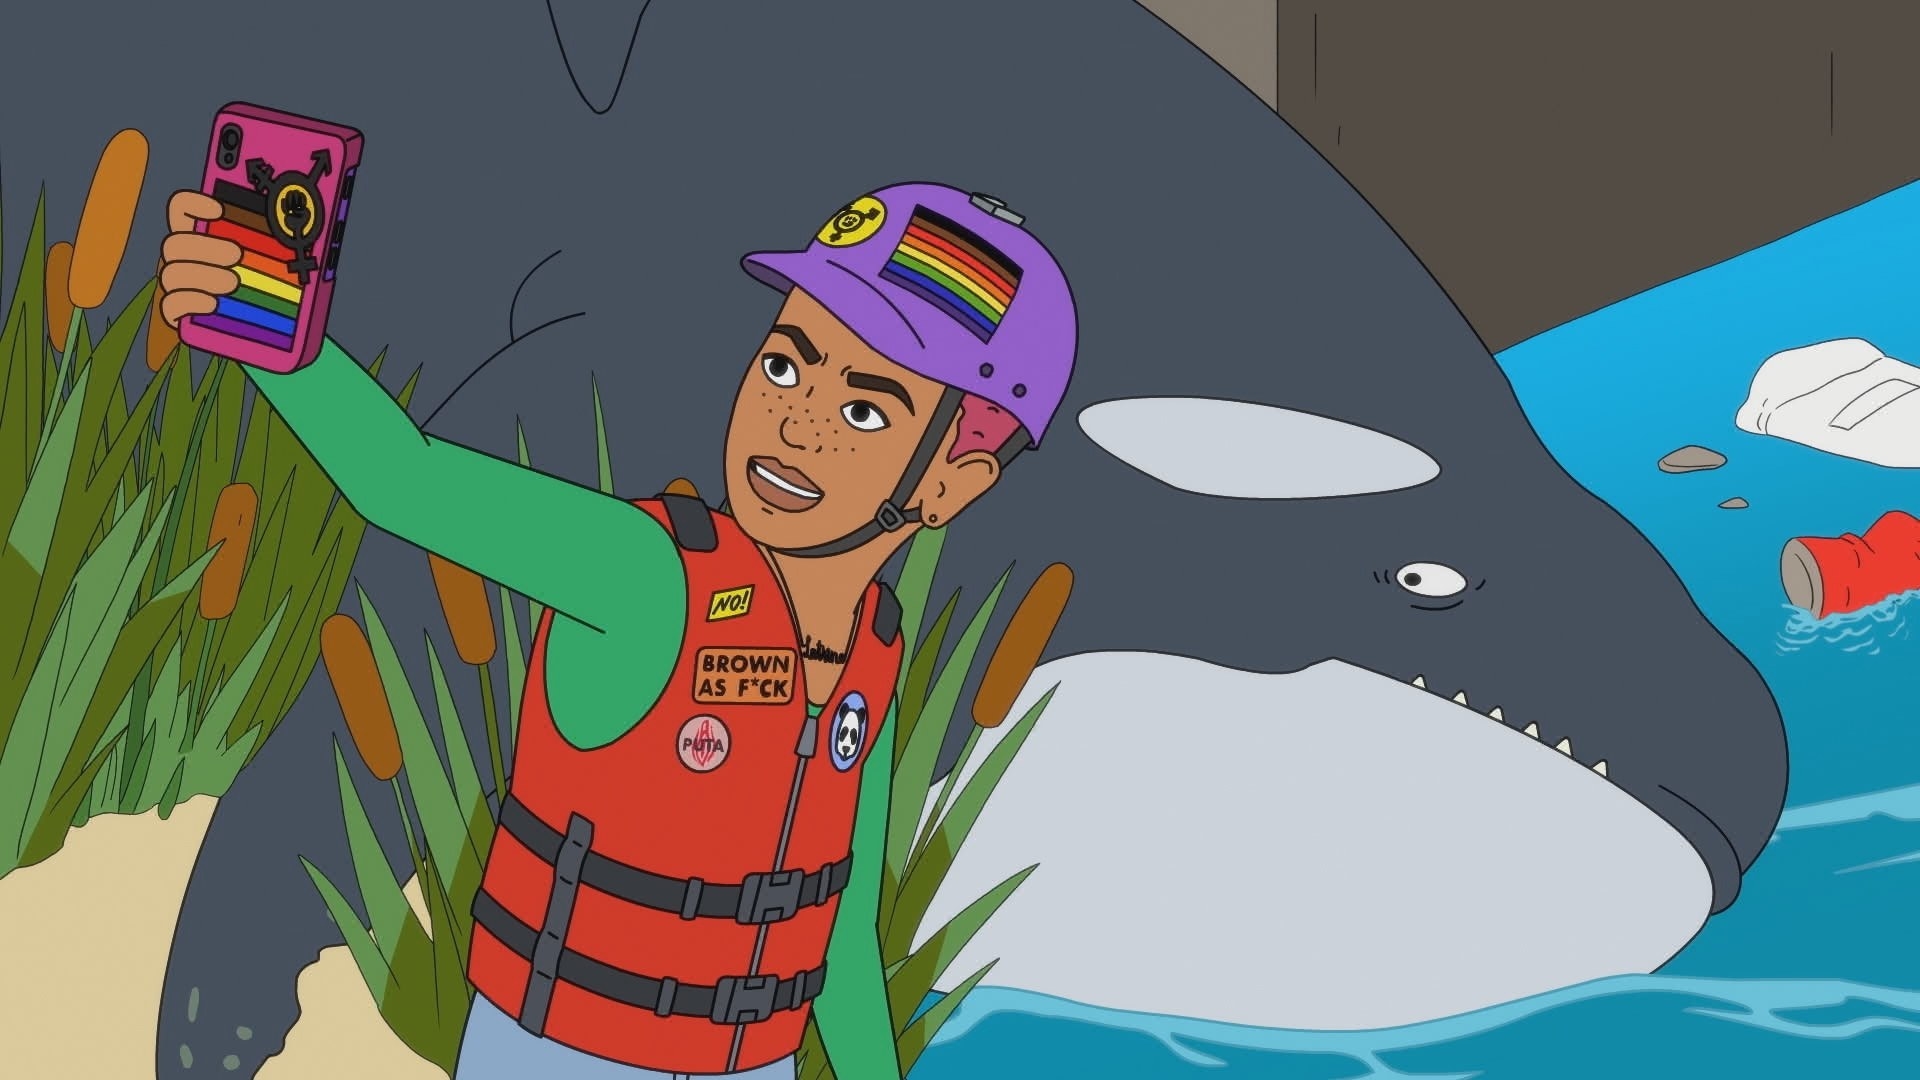 A still from the animated series Fairfax